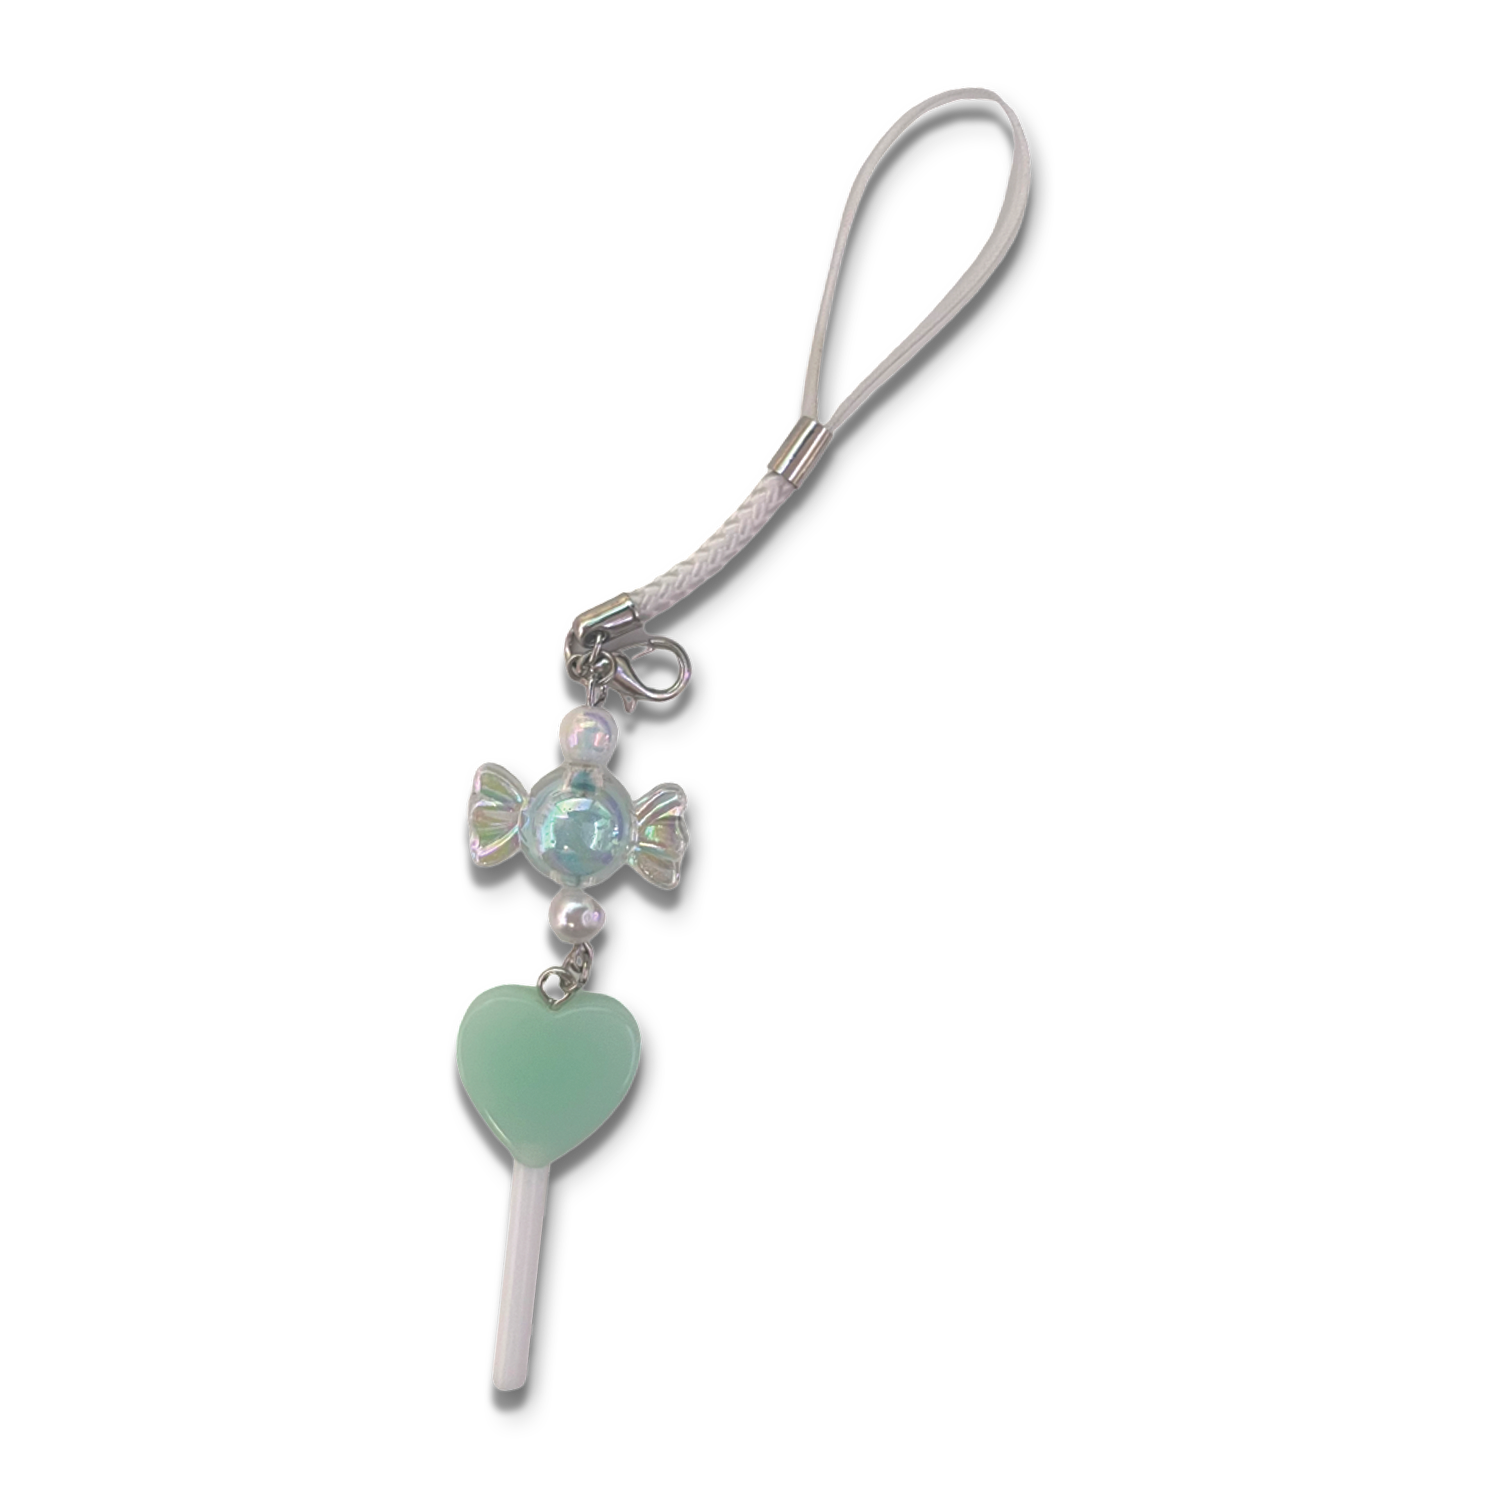 Small blue lollipop and blue candy charm with white braided phone strap.